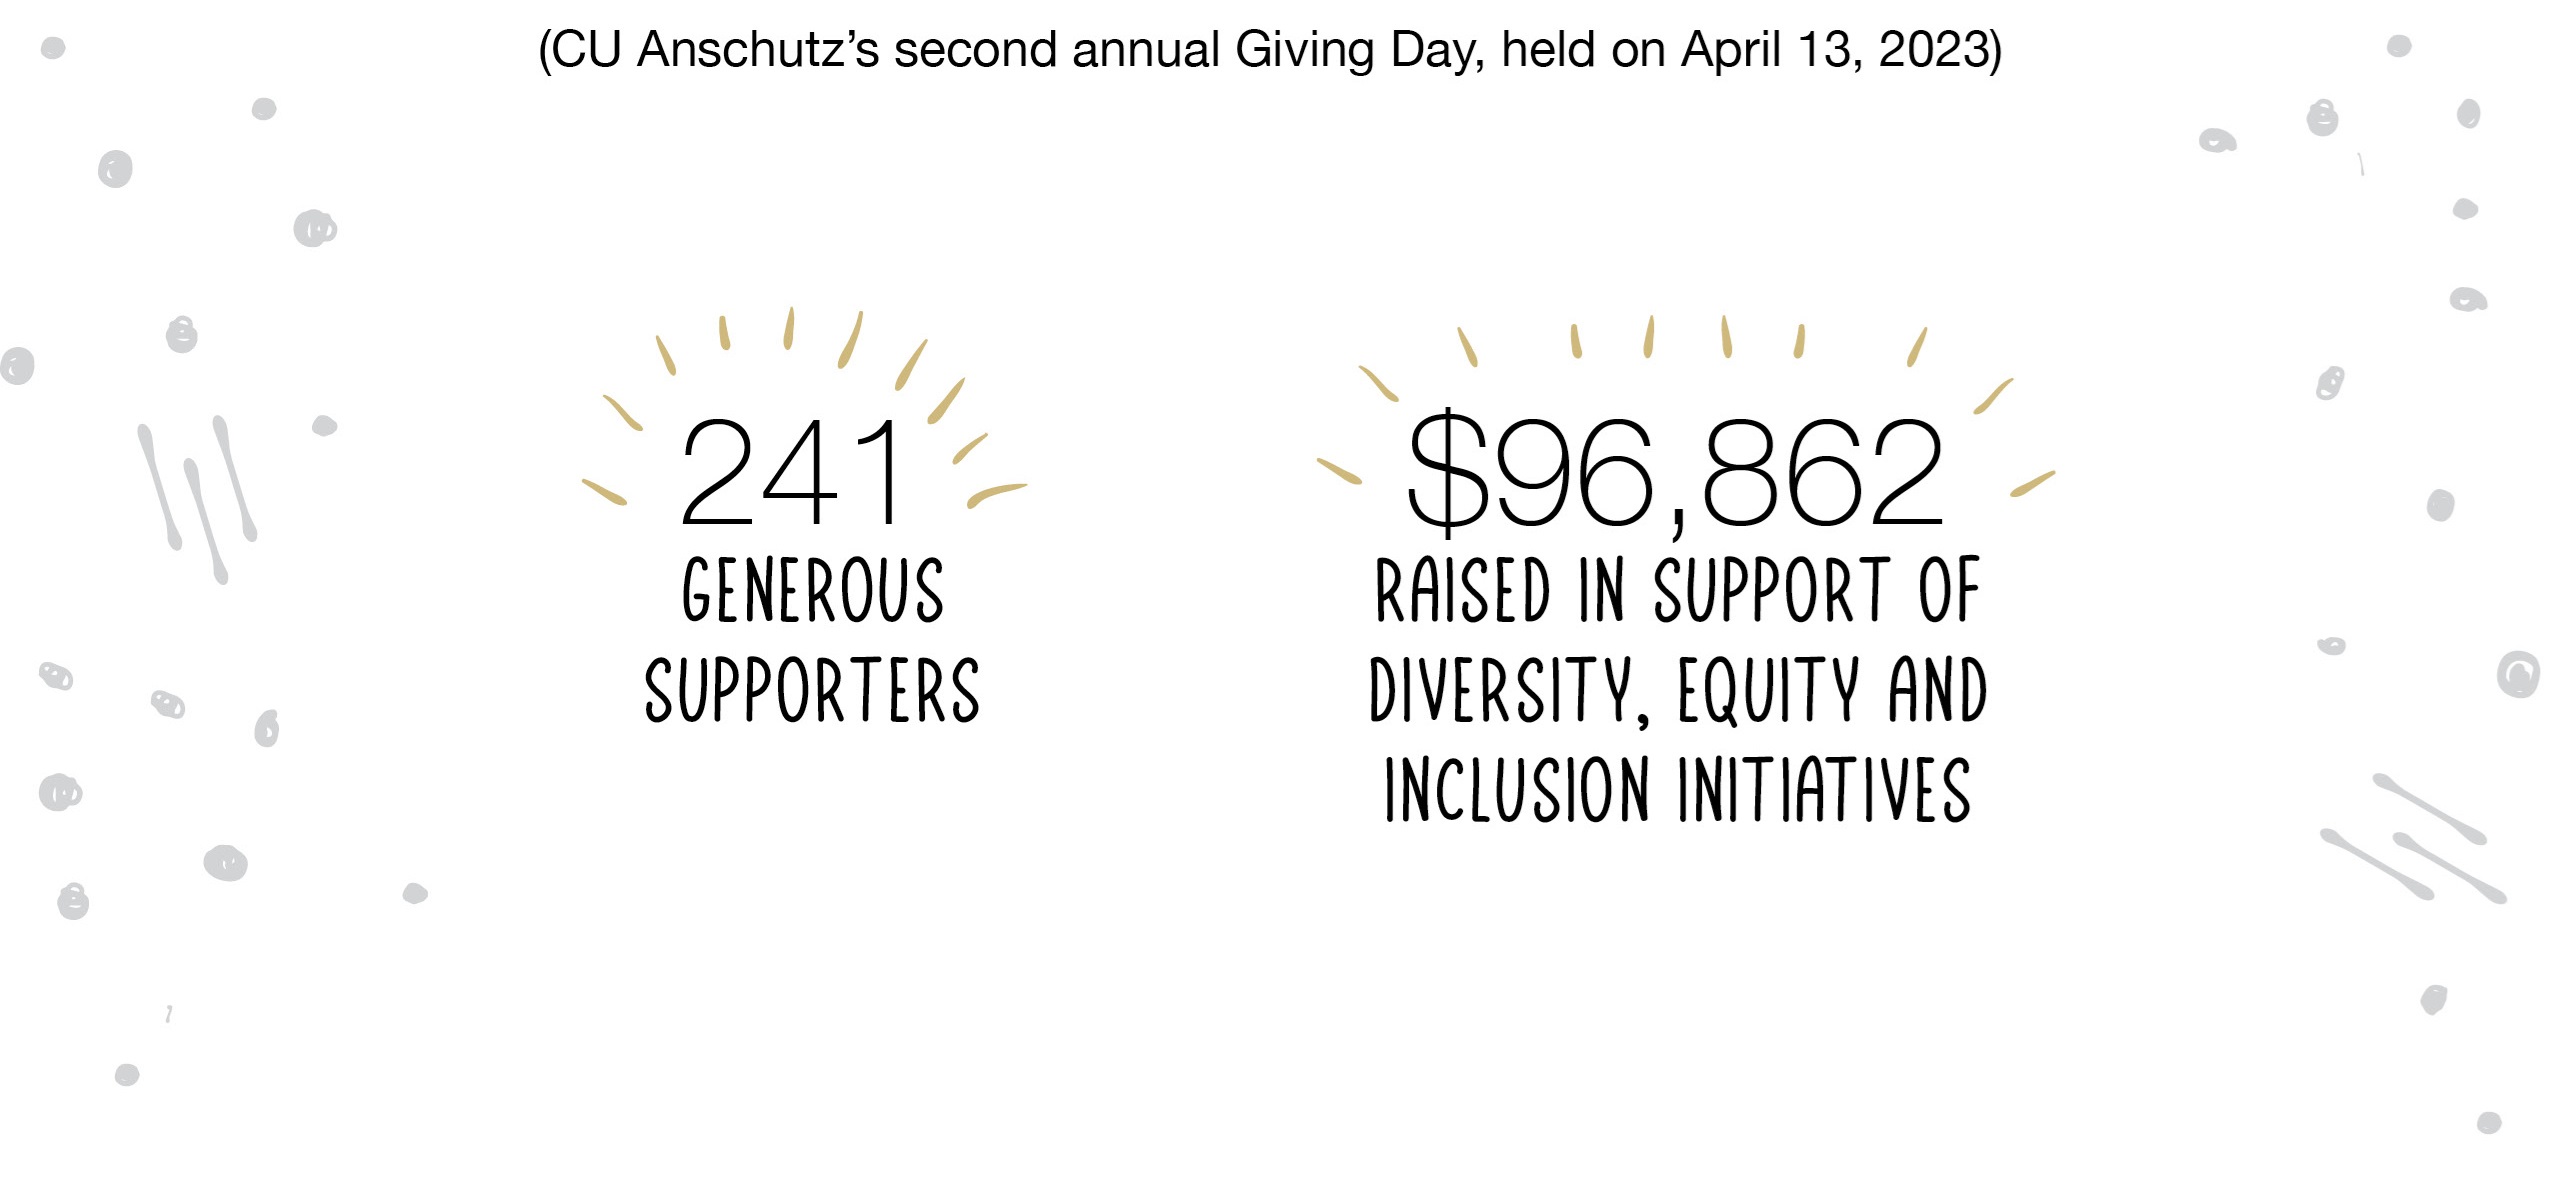 241 generous supporters who raised $96,862 in support of diversity, equity, and inclusion initiatives